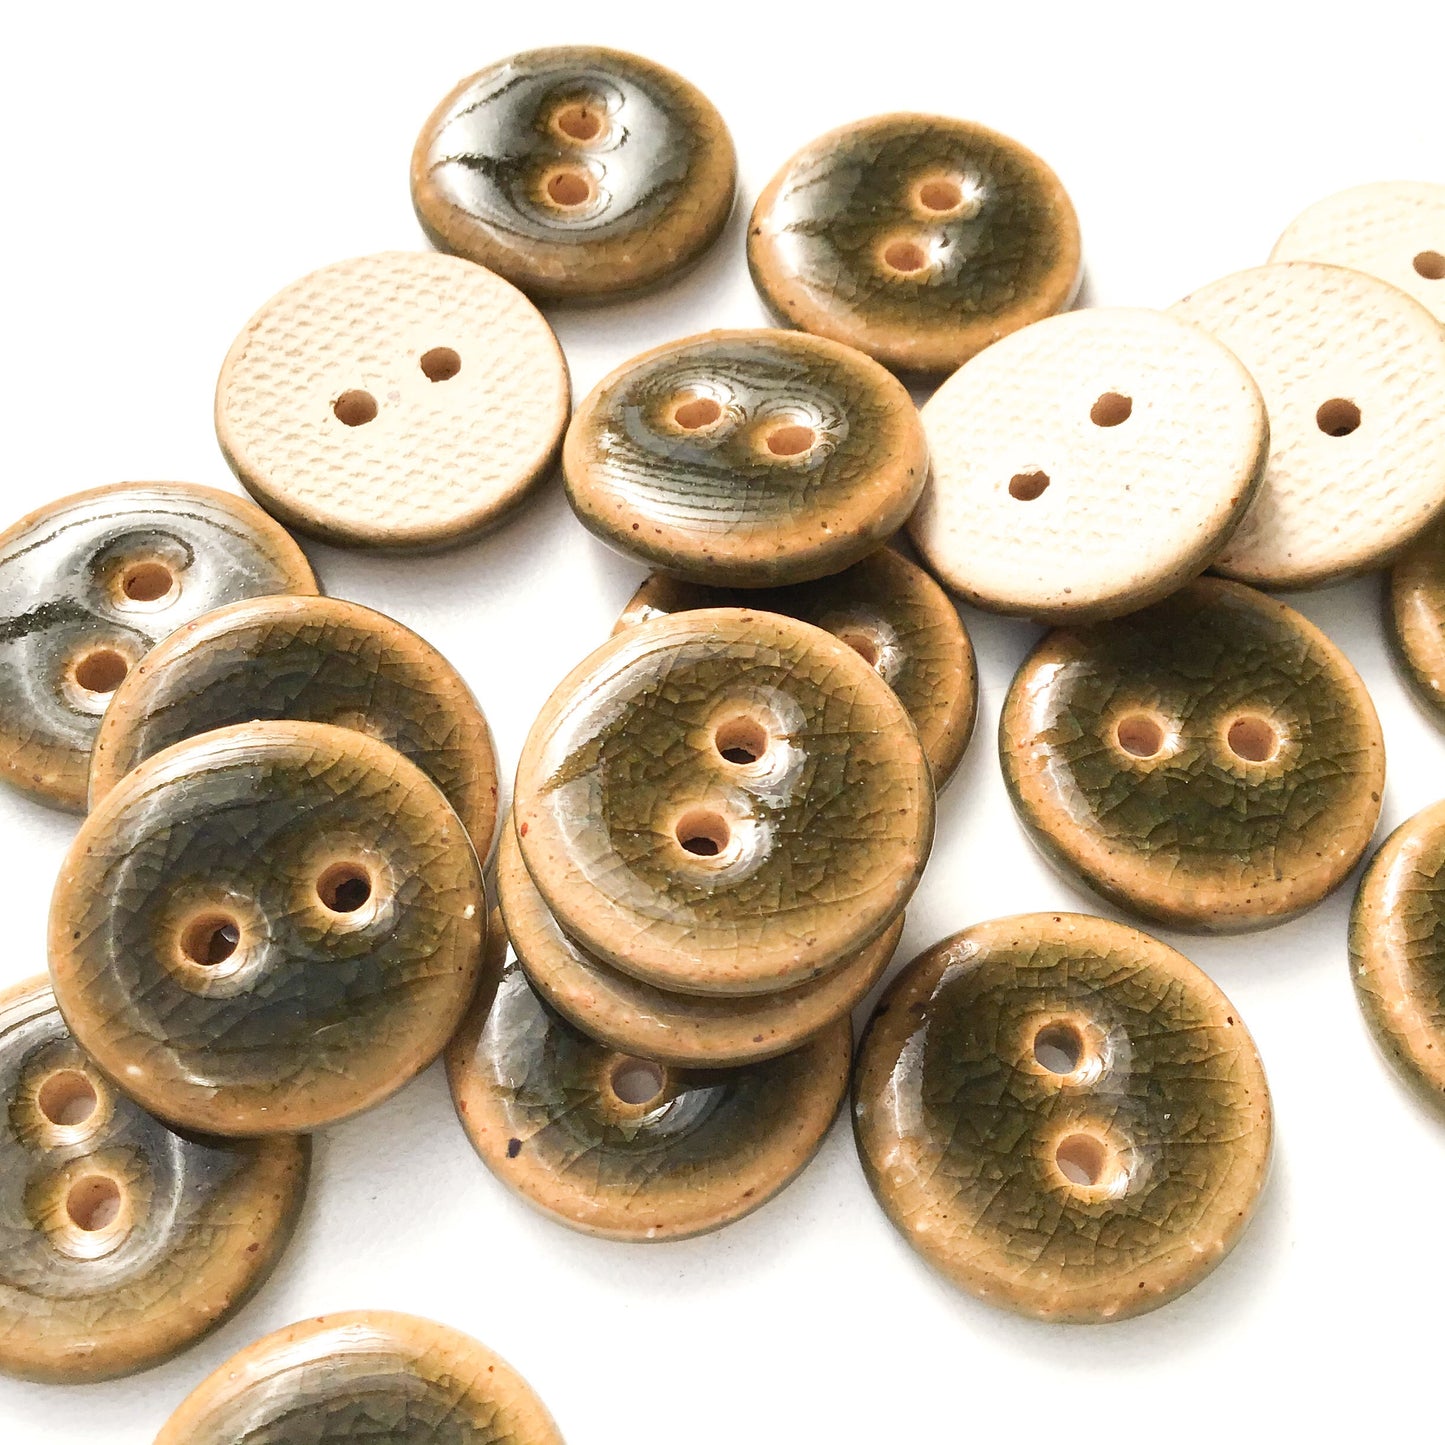 Deep Green Crackle Ceramic Buttons - Dark Olive Clay Buttons - 3/4" (ws-77)